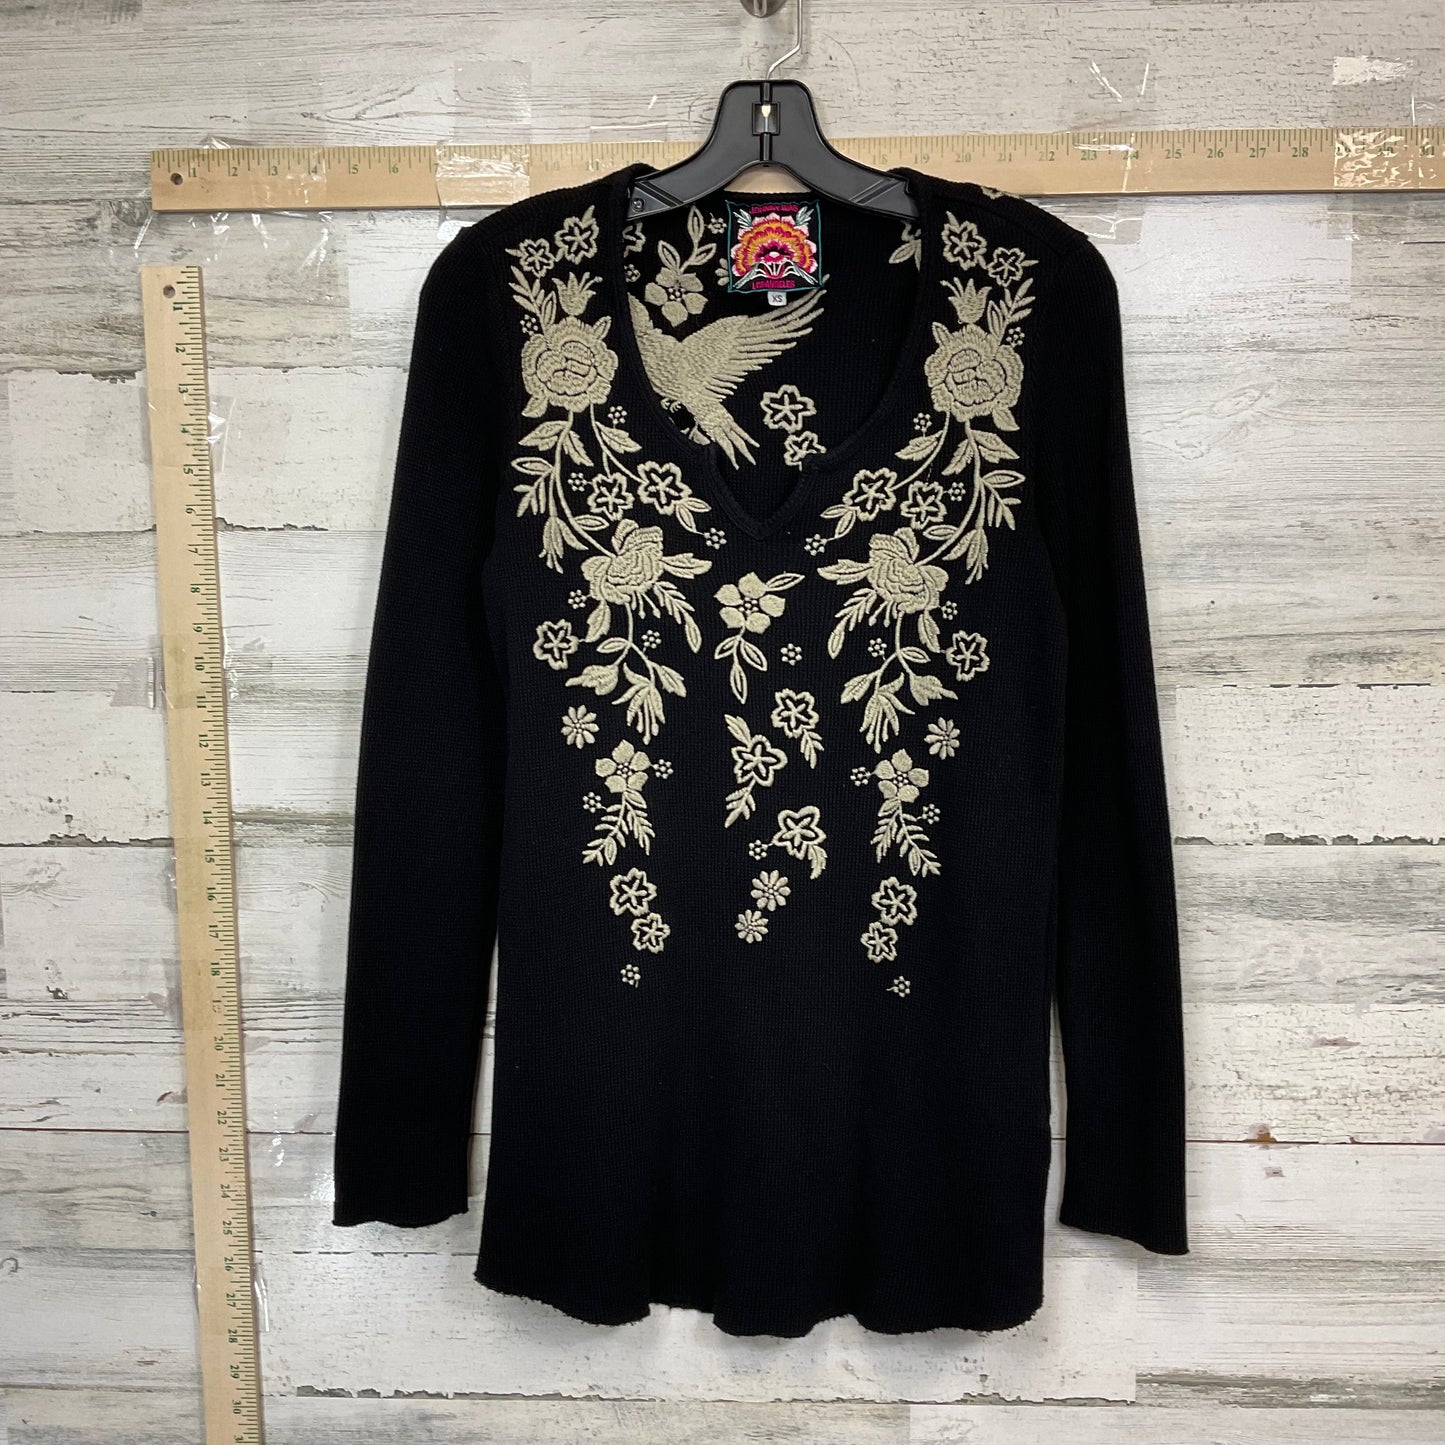 Black Top Long Sleeve Johnny Was, Size Xs